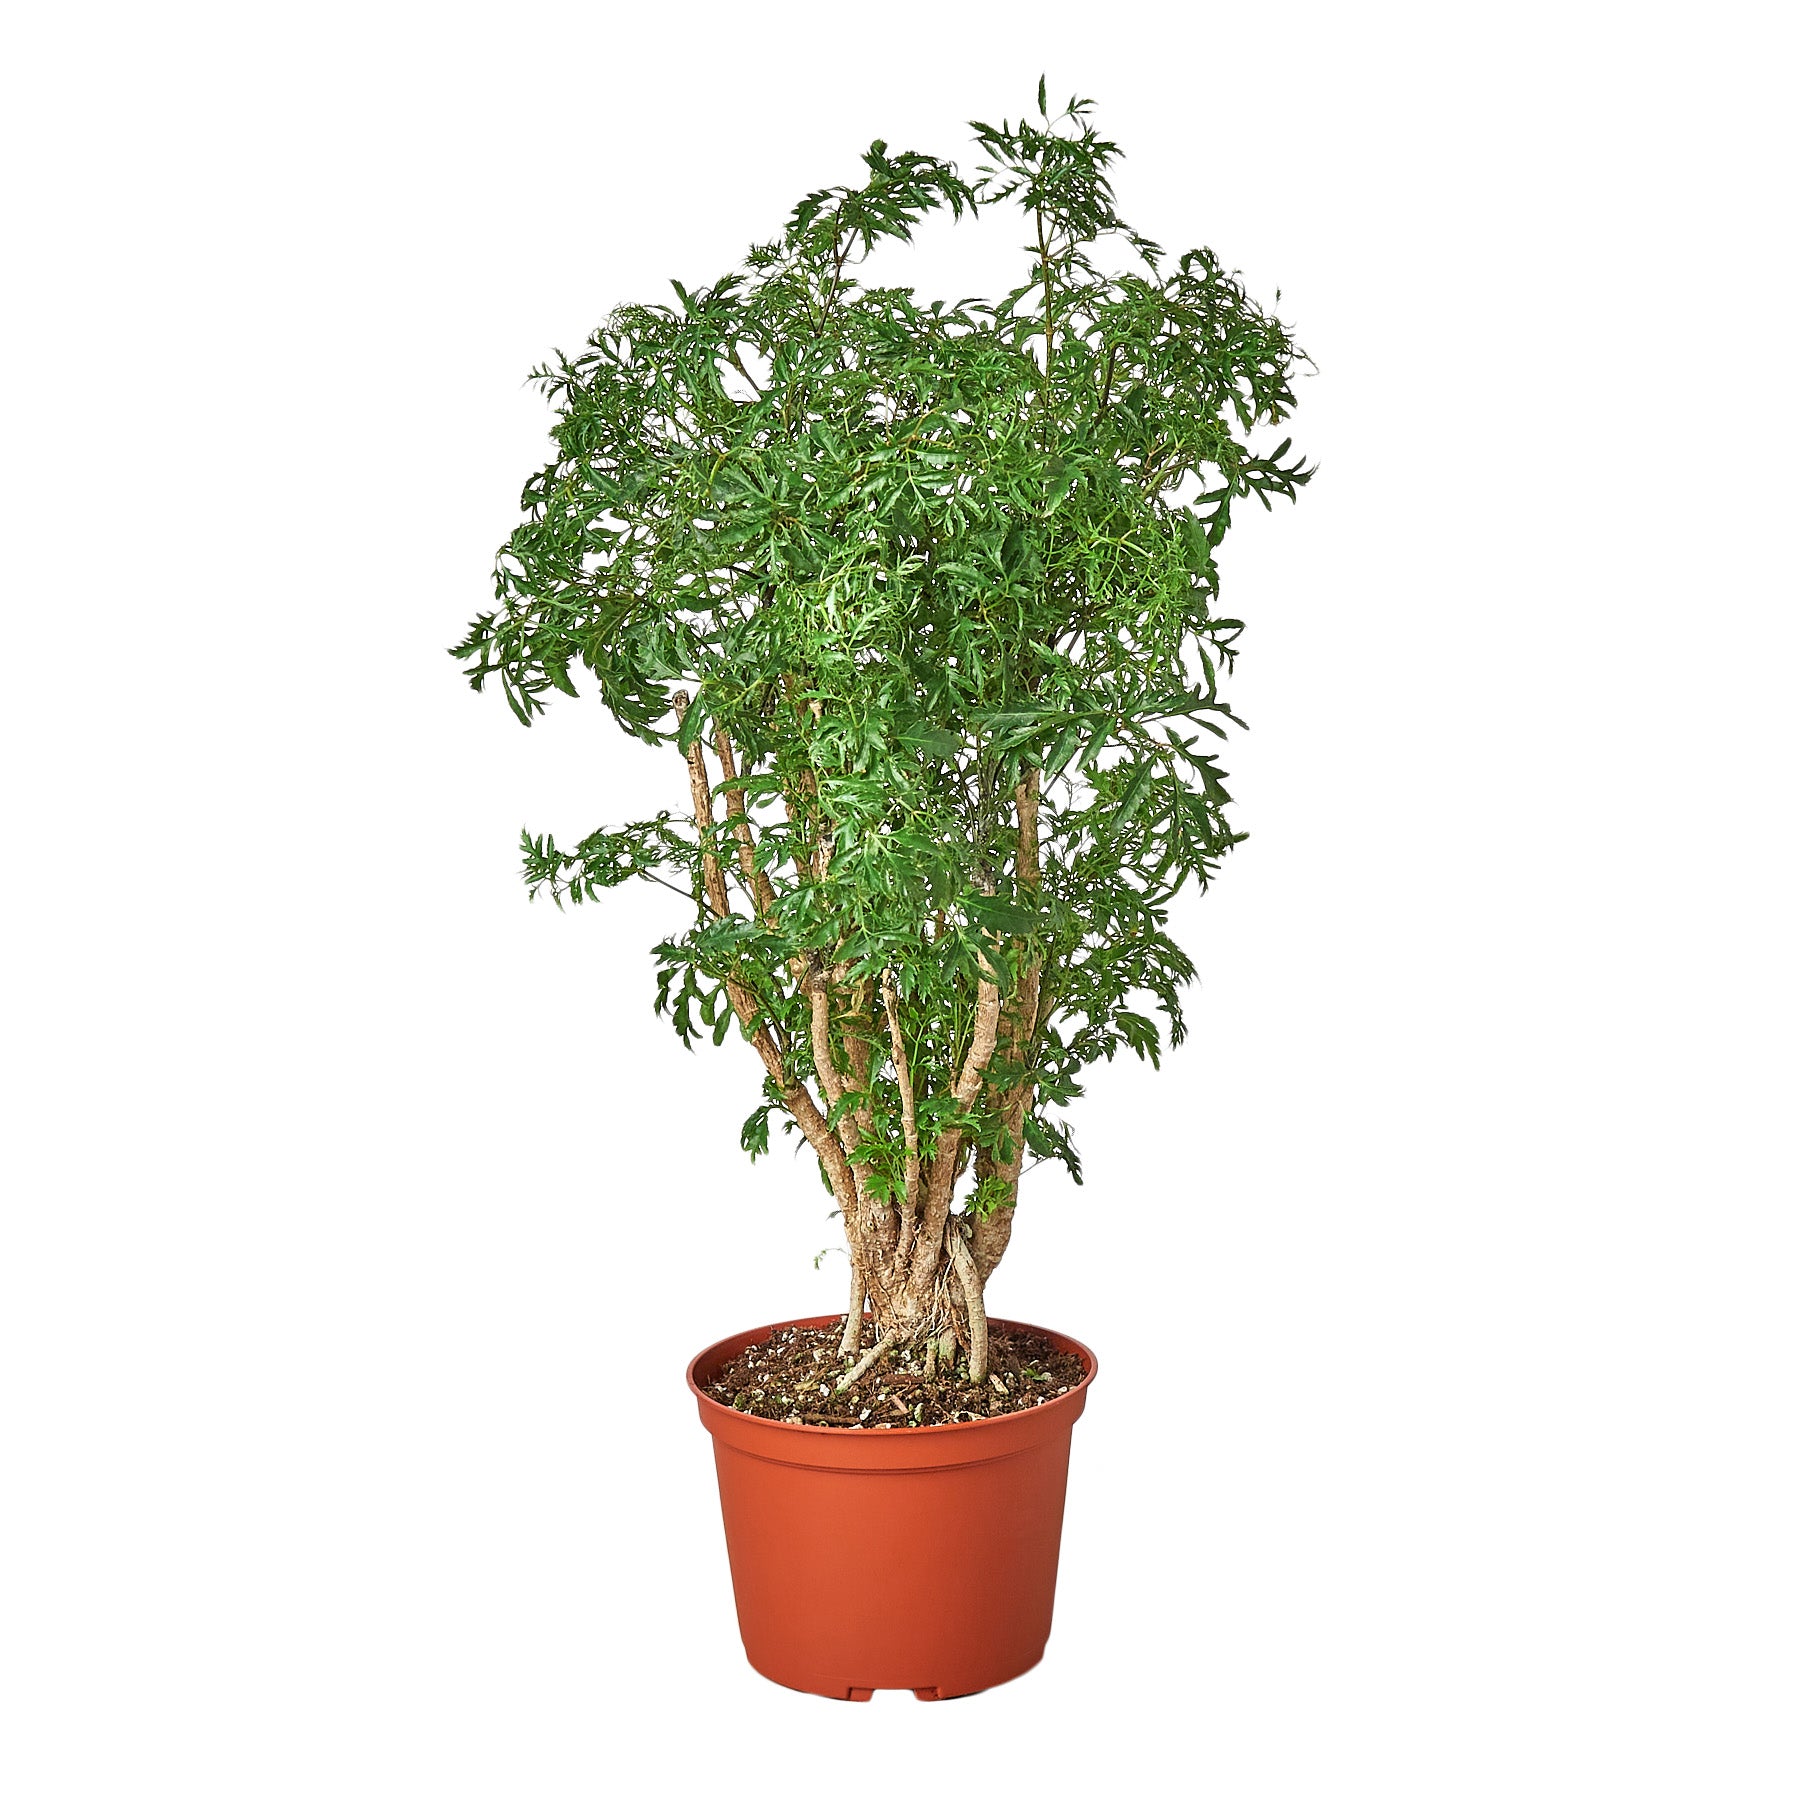 A small tree in a pot on a white background.